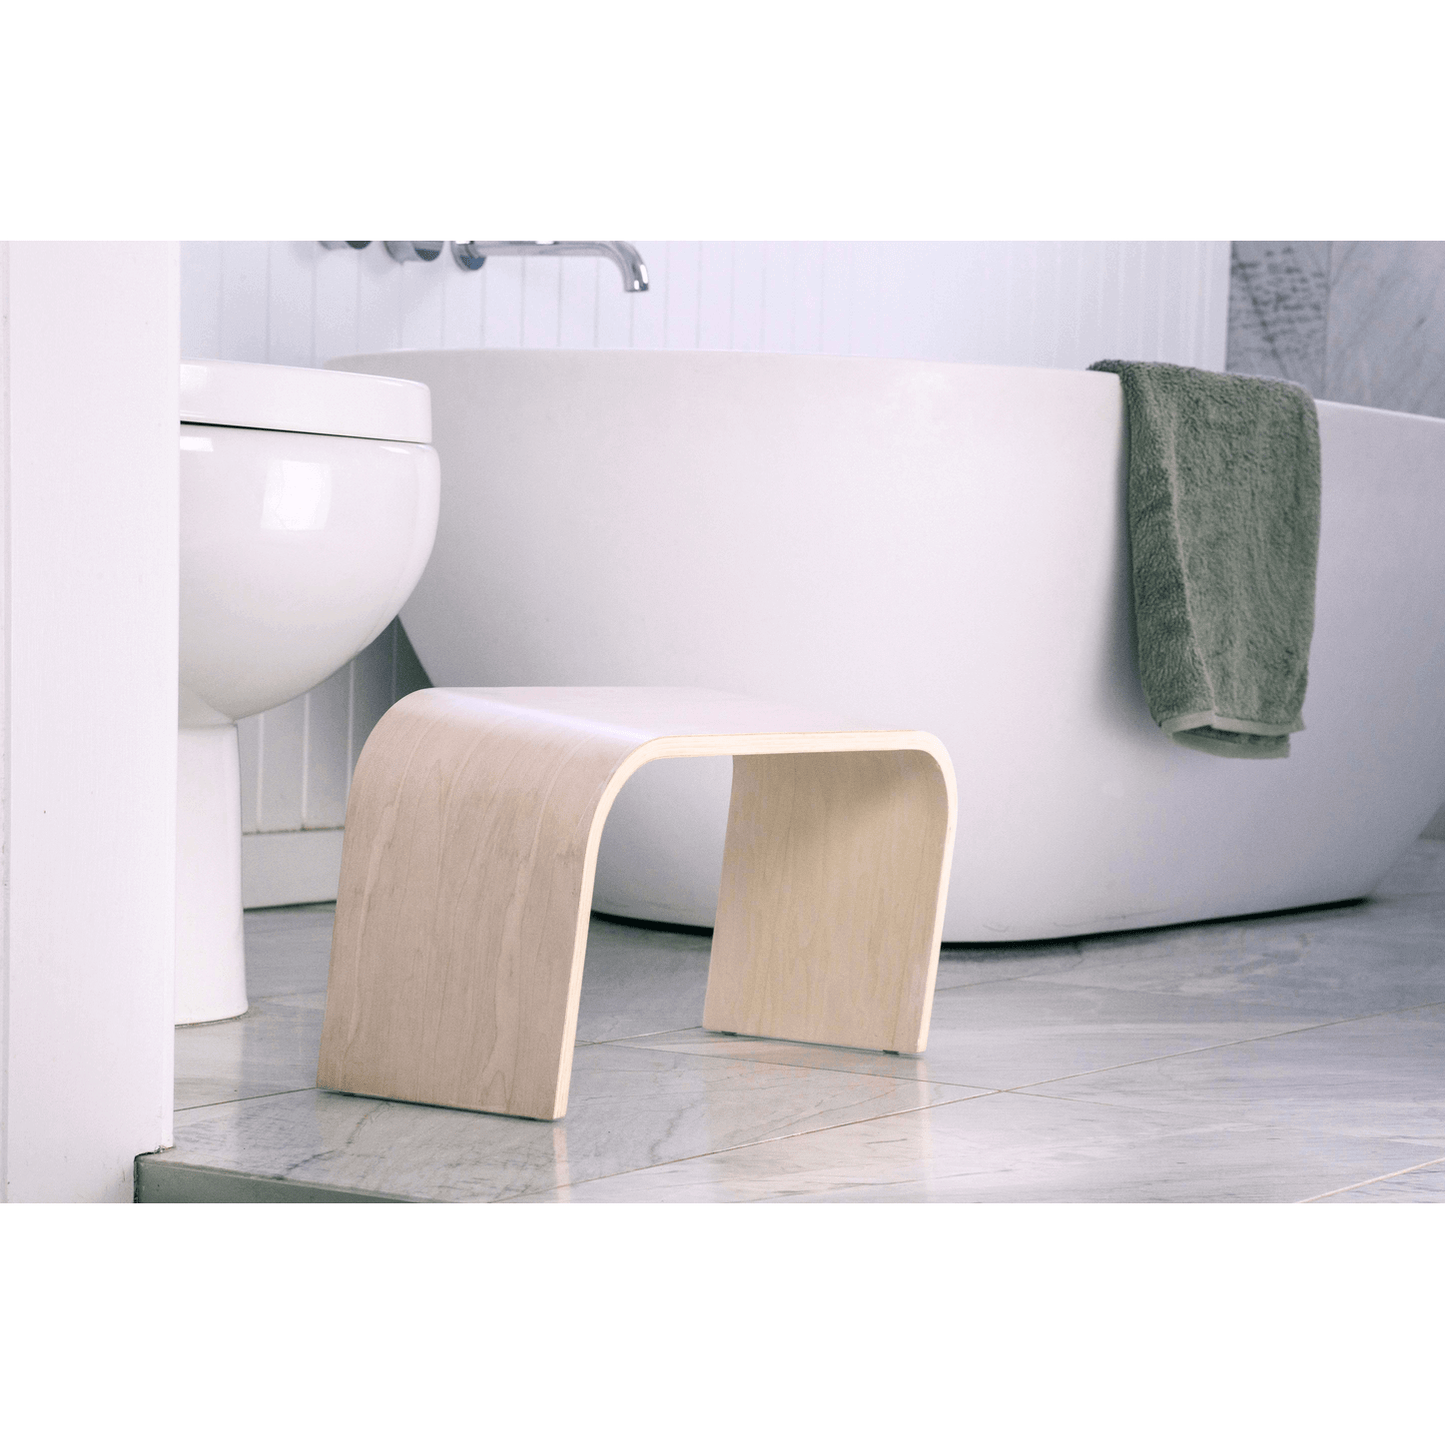 The PROPPR Timber - Whitewash Toilet Foot Stool - side angled view in a bathroom